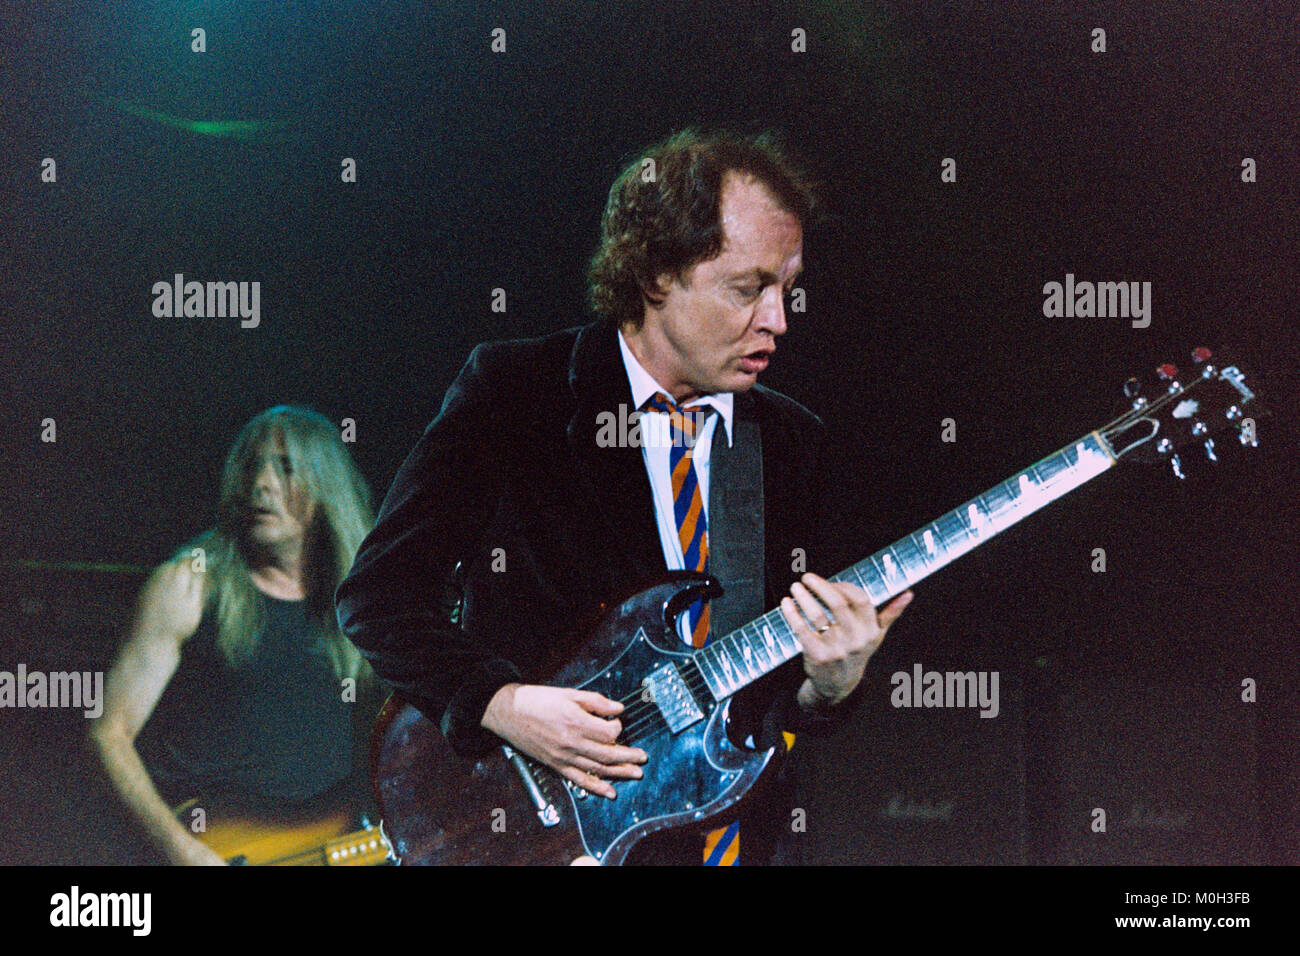 Angus Young of Australian Rock group AC/DC performing at the Hammersmith Apollo. 21st October 2003, London, England, United Kingdom. Stock Photo